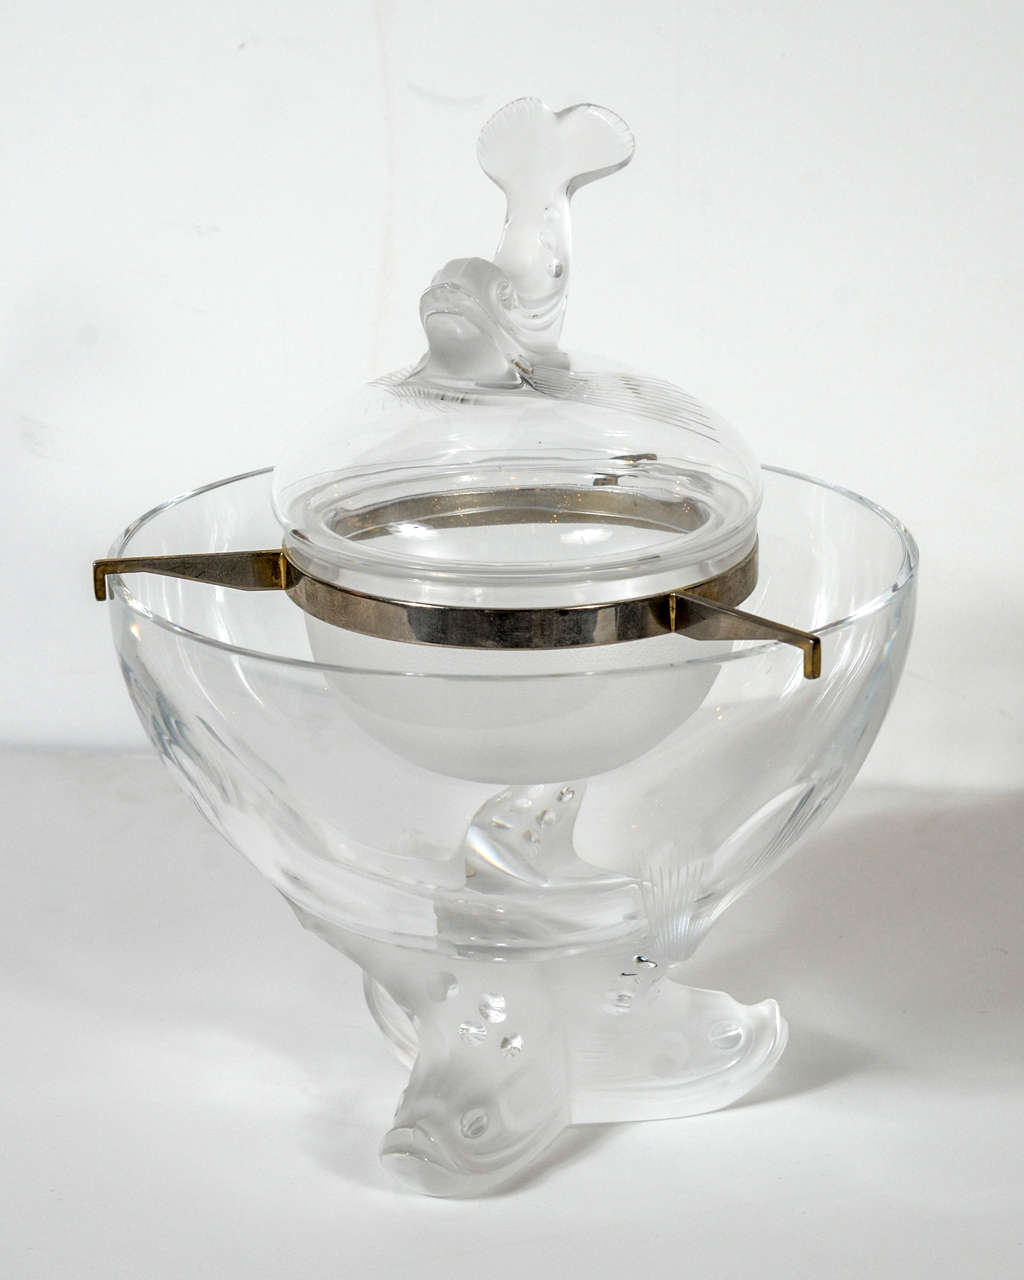 This clear and frosted glass Caviar dish by Lalique features a figural dolphin tripod ice base with insert Caviar bowl with silvered supports and a chic finial on the lid.